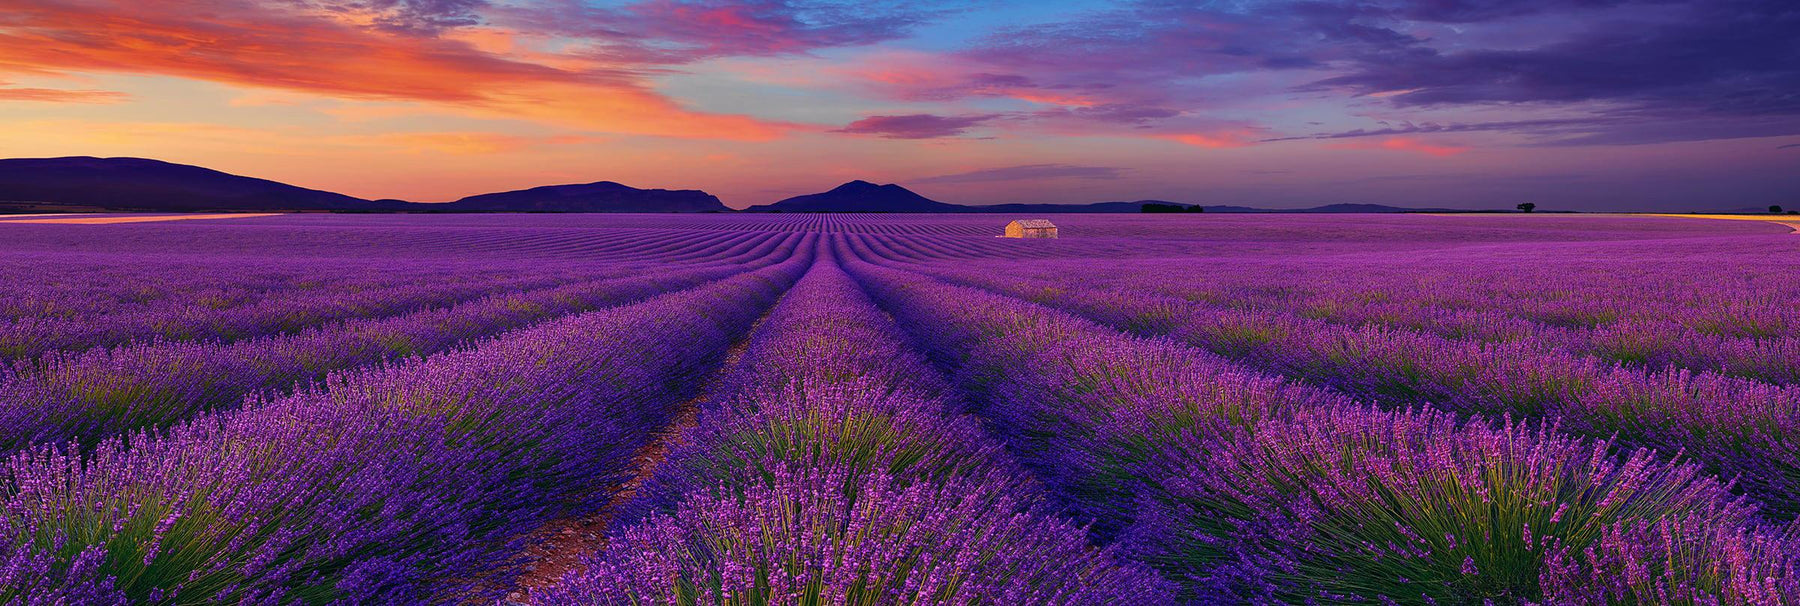 Purple rows of lavender leading to a shack and mountains under a cloudy sky at sunset in Valensole France